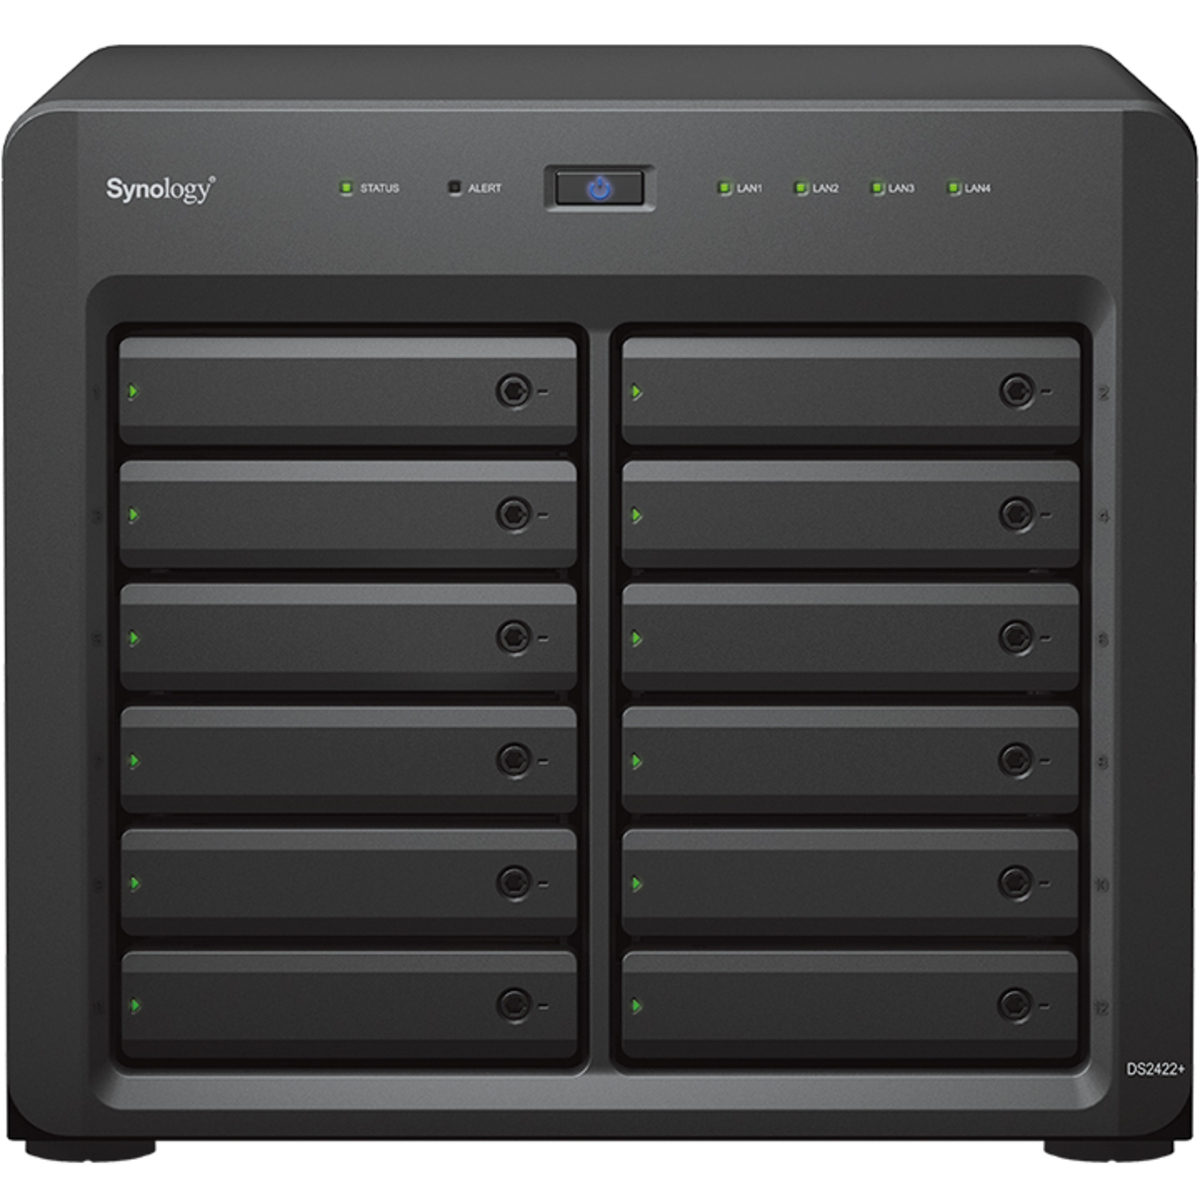 Synology DiskStation DS2422+ 100tb 12-Bay Desktop Multimedia / Power User / Business NAS - Network Attached Storage Device 10x10tb Seagate IronWolf Pro ST10000NT001 3.5 7200rpm SATA 6Gb/s HDD NAS Class Drives Installed - Burn-In Tested - ON SALE - FREE RAM UPGRADE DiskStation DS2422+